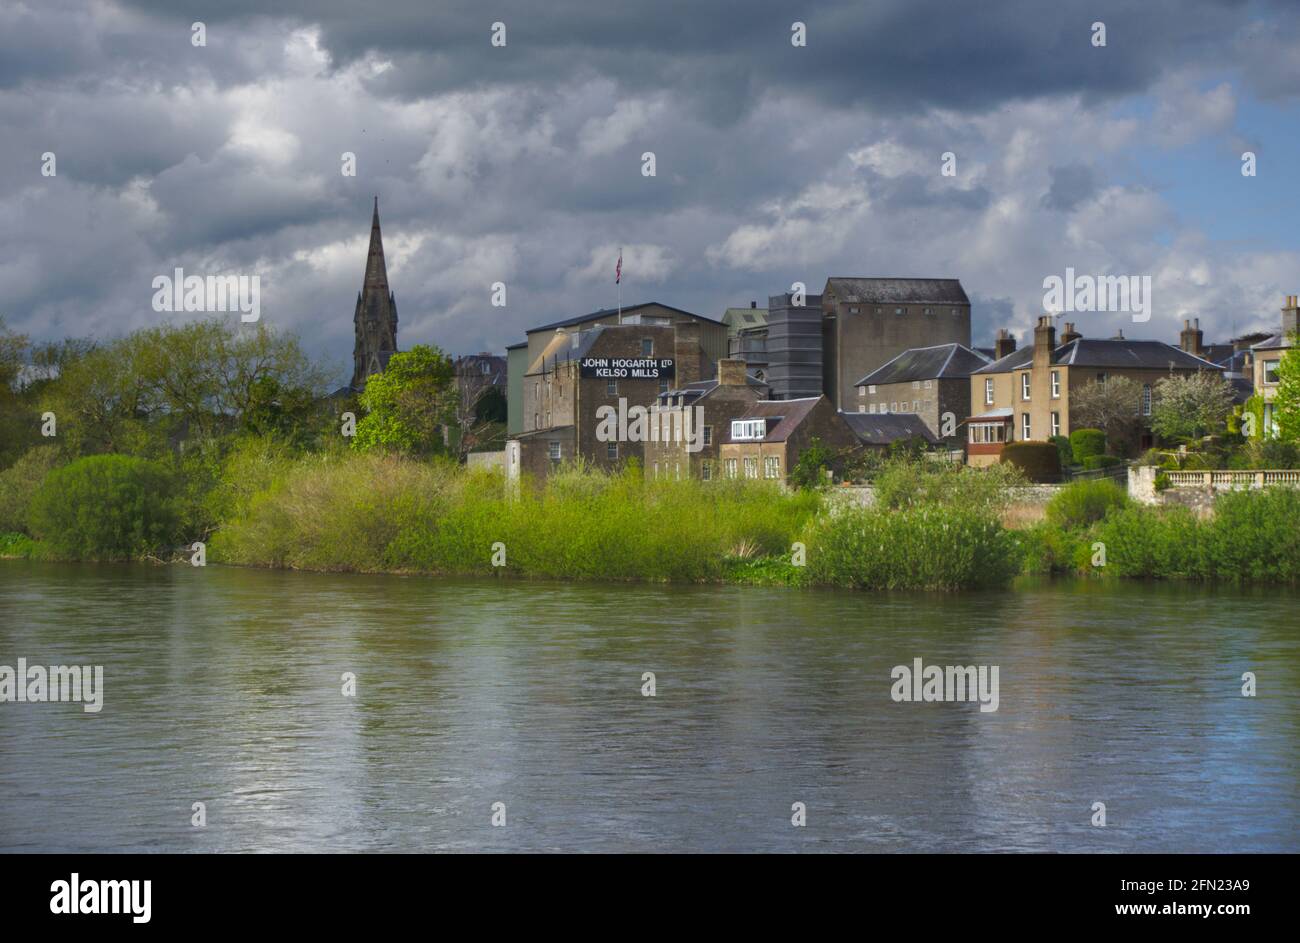 View across the River Tweed of Kelso under a threatening sky, with John Hogarth Ltd Kelso Mills and Kelso North Parish Church in the background. Stock Photo